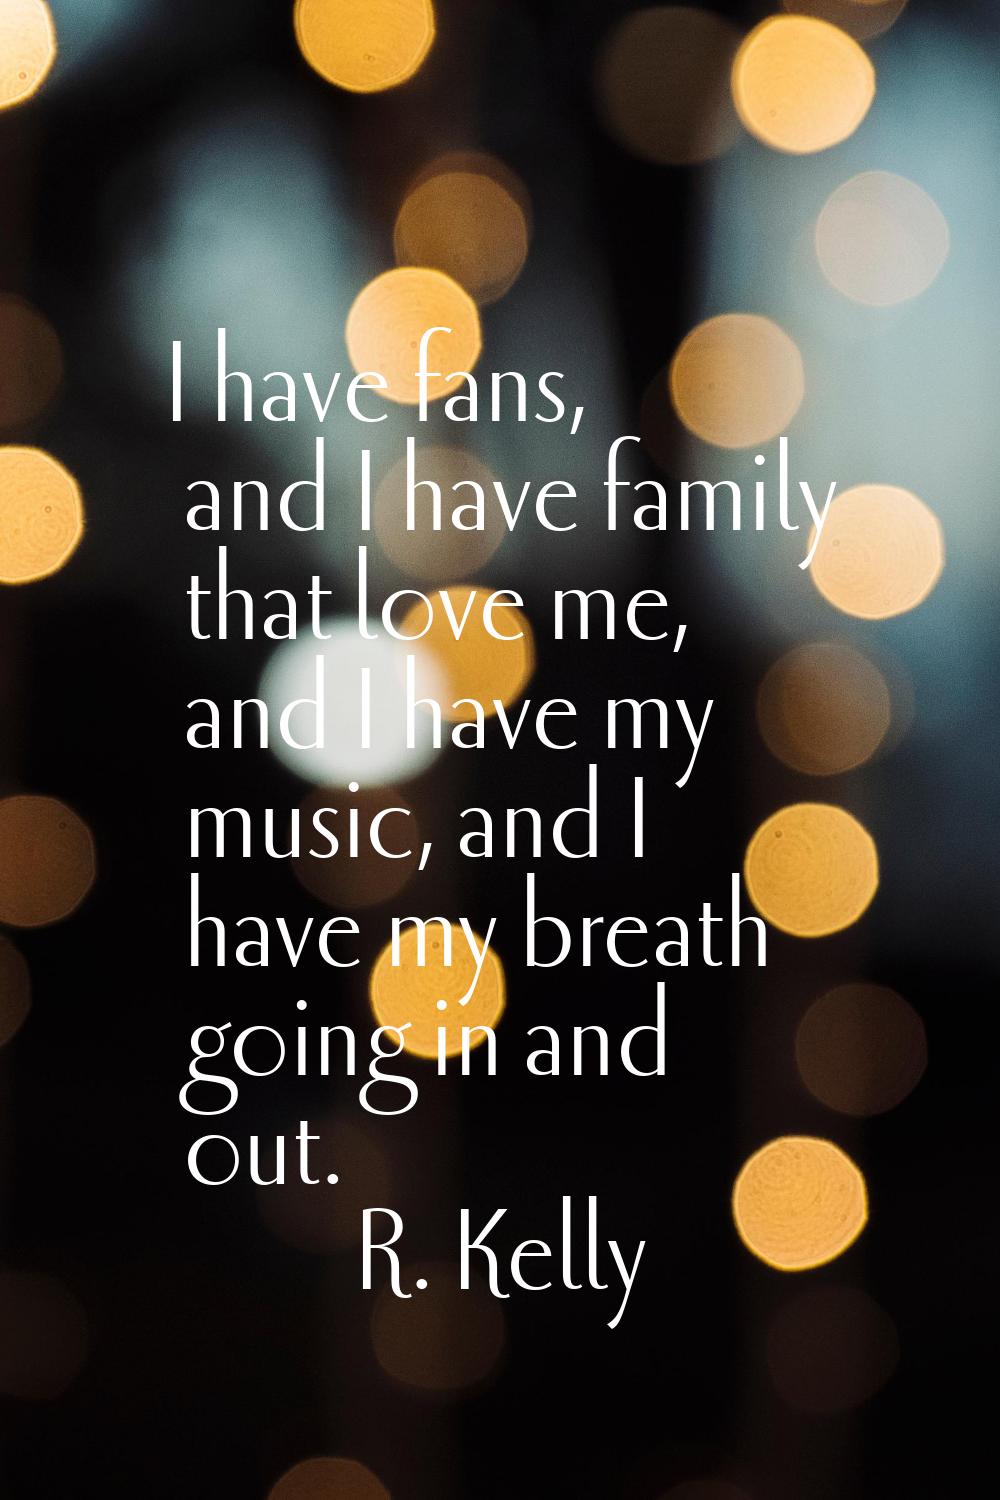 I have fans, and I have family that love me, and I have my music, and I have my breath going in and